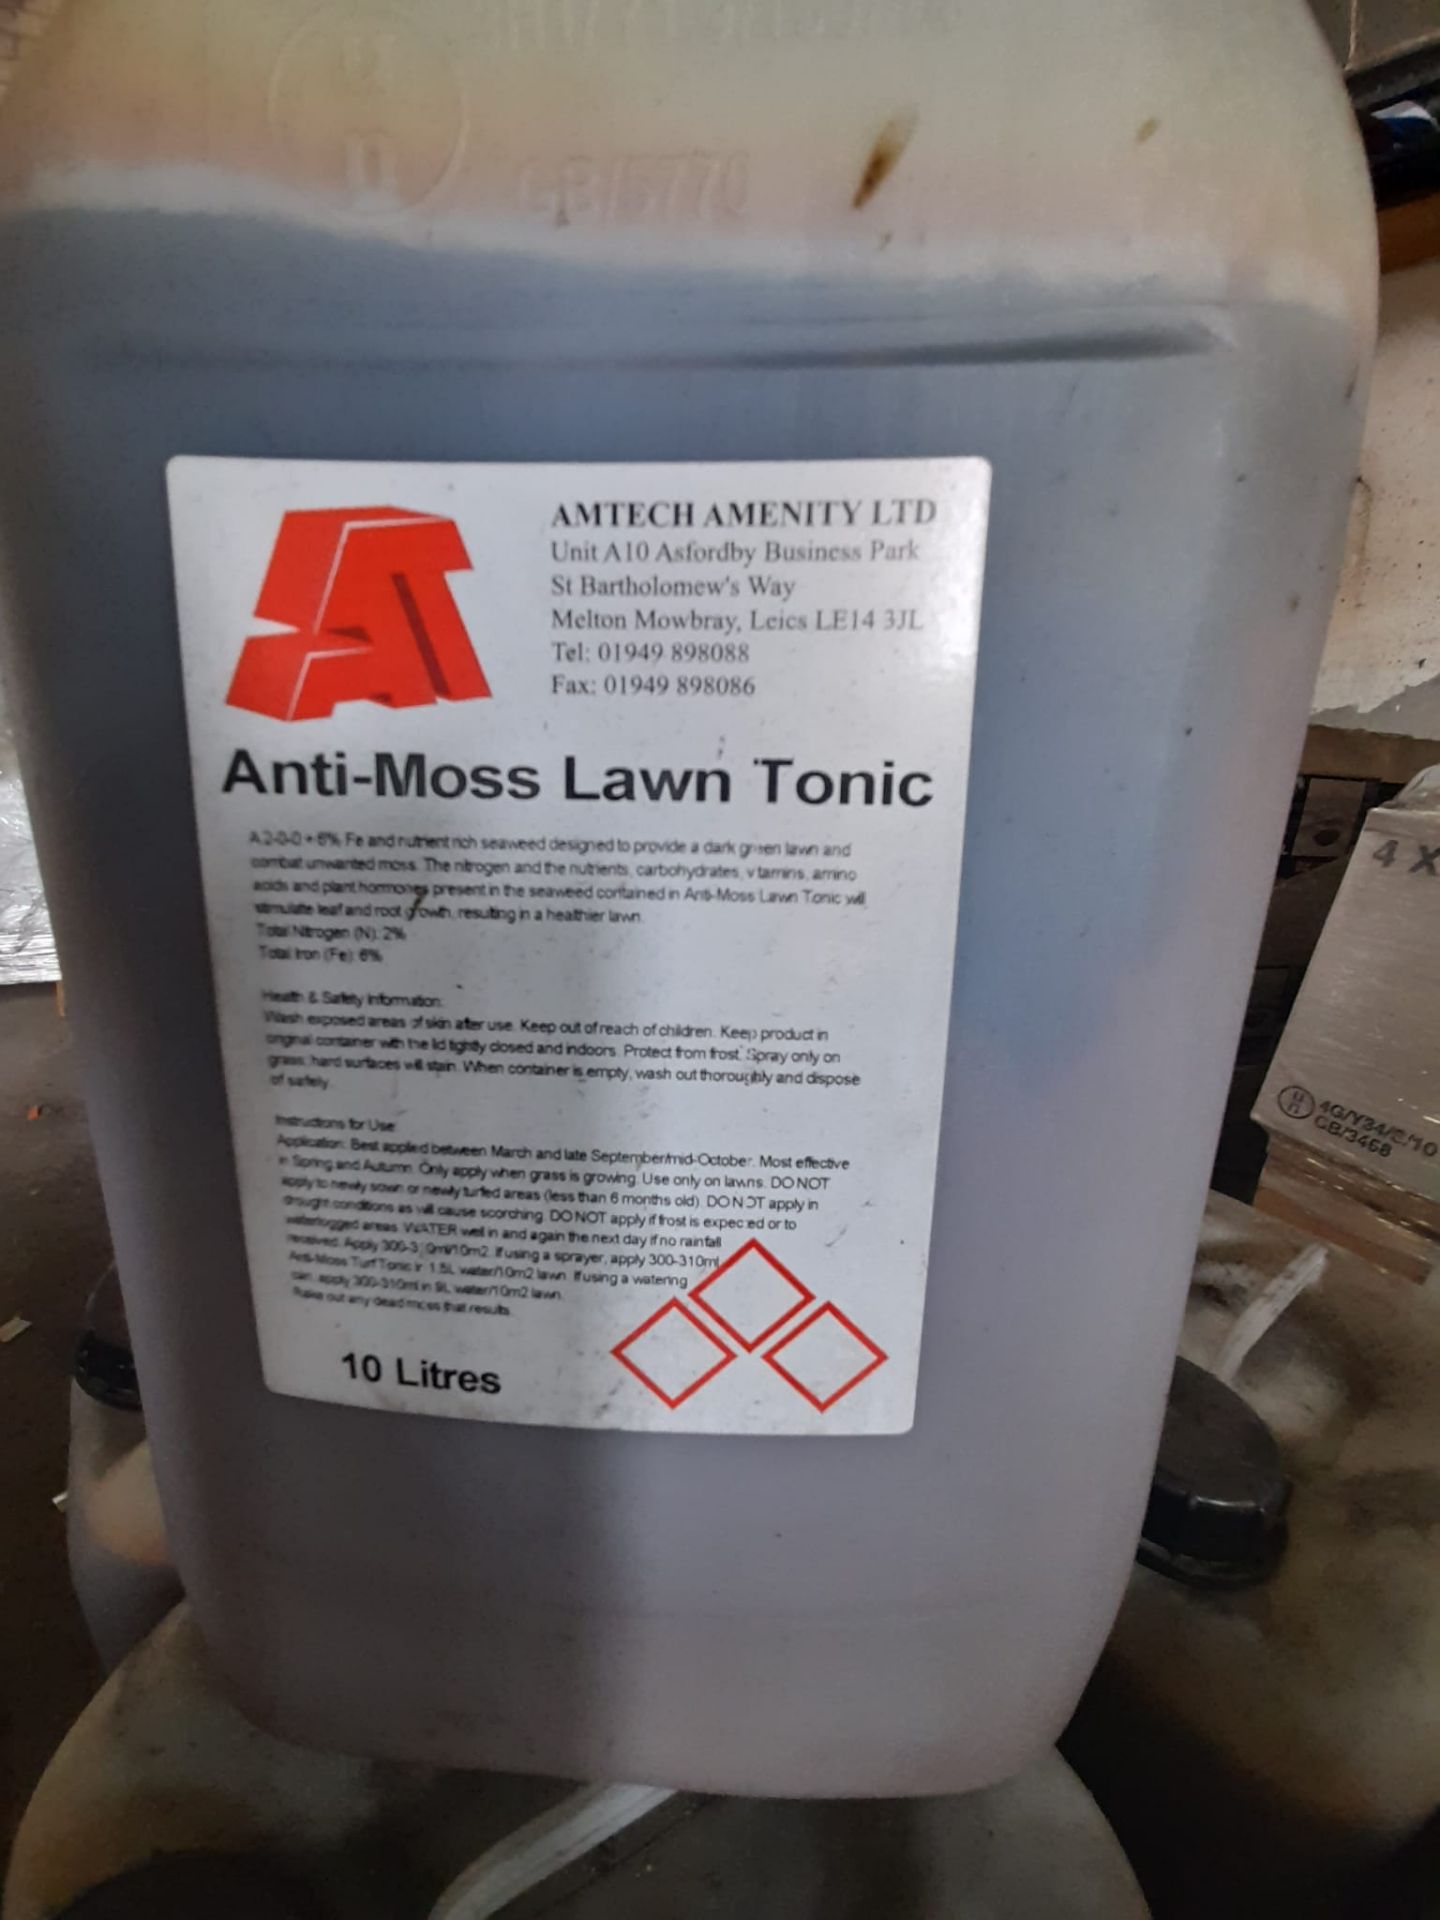 Pallet Approximately 11 Tubs Anti-Moss Lawn Tonic, Intake Combi - Image 2 of 3